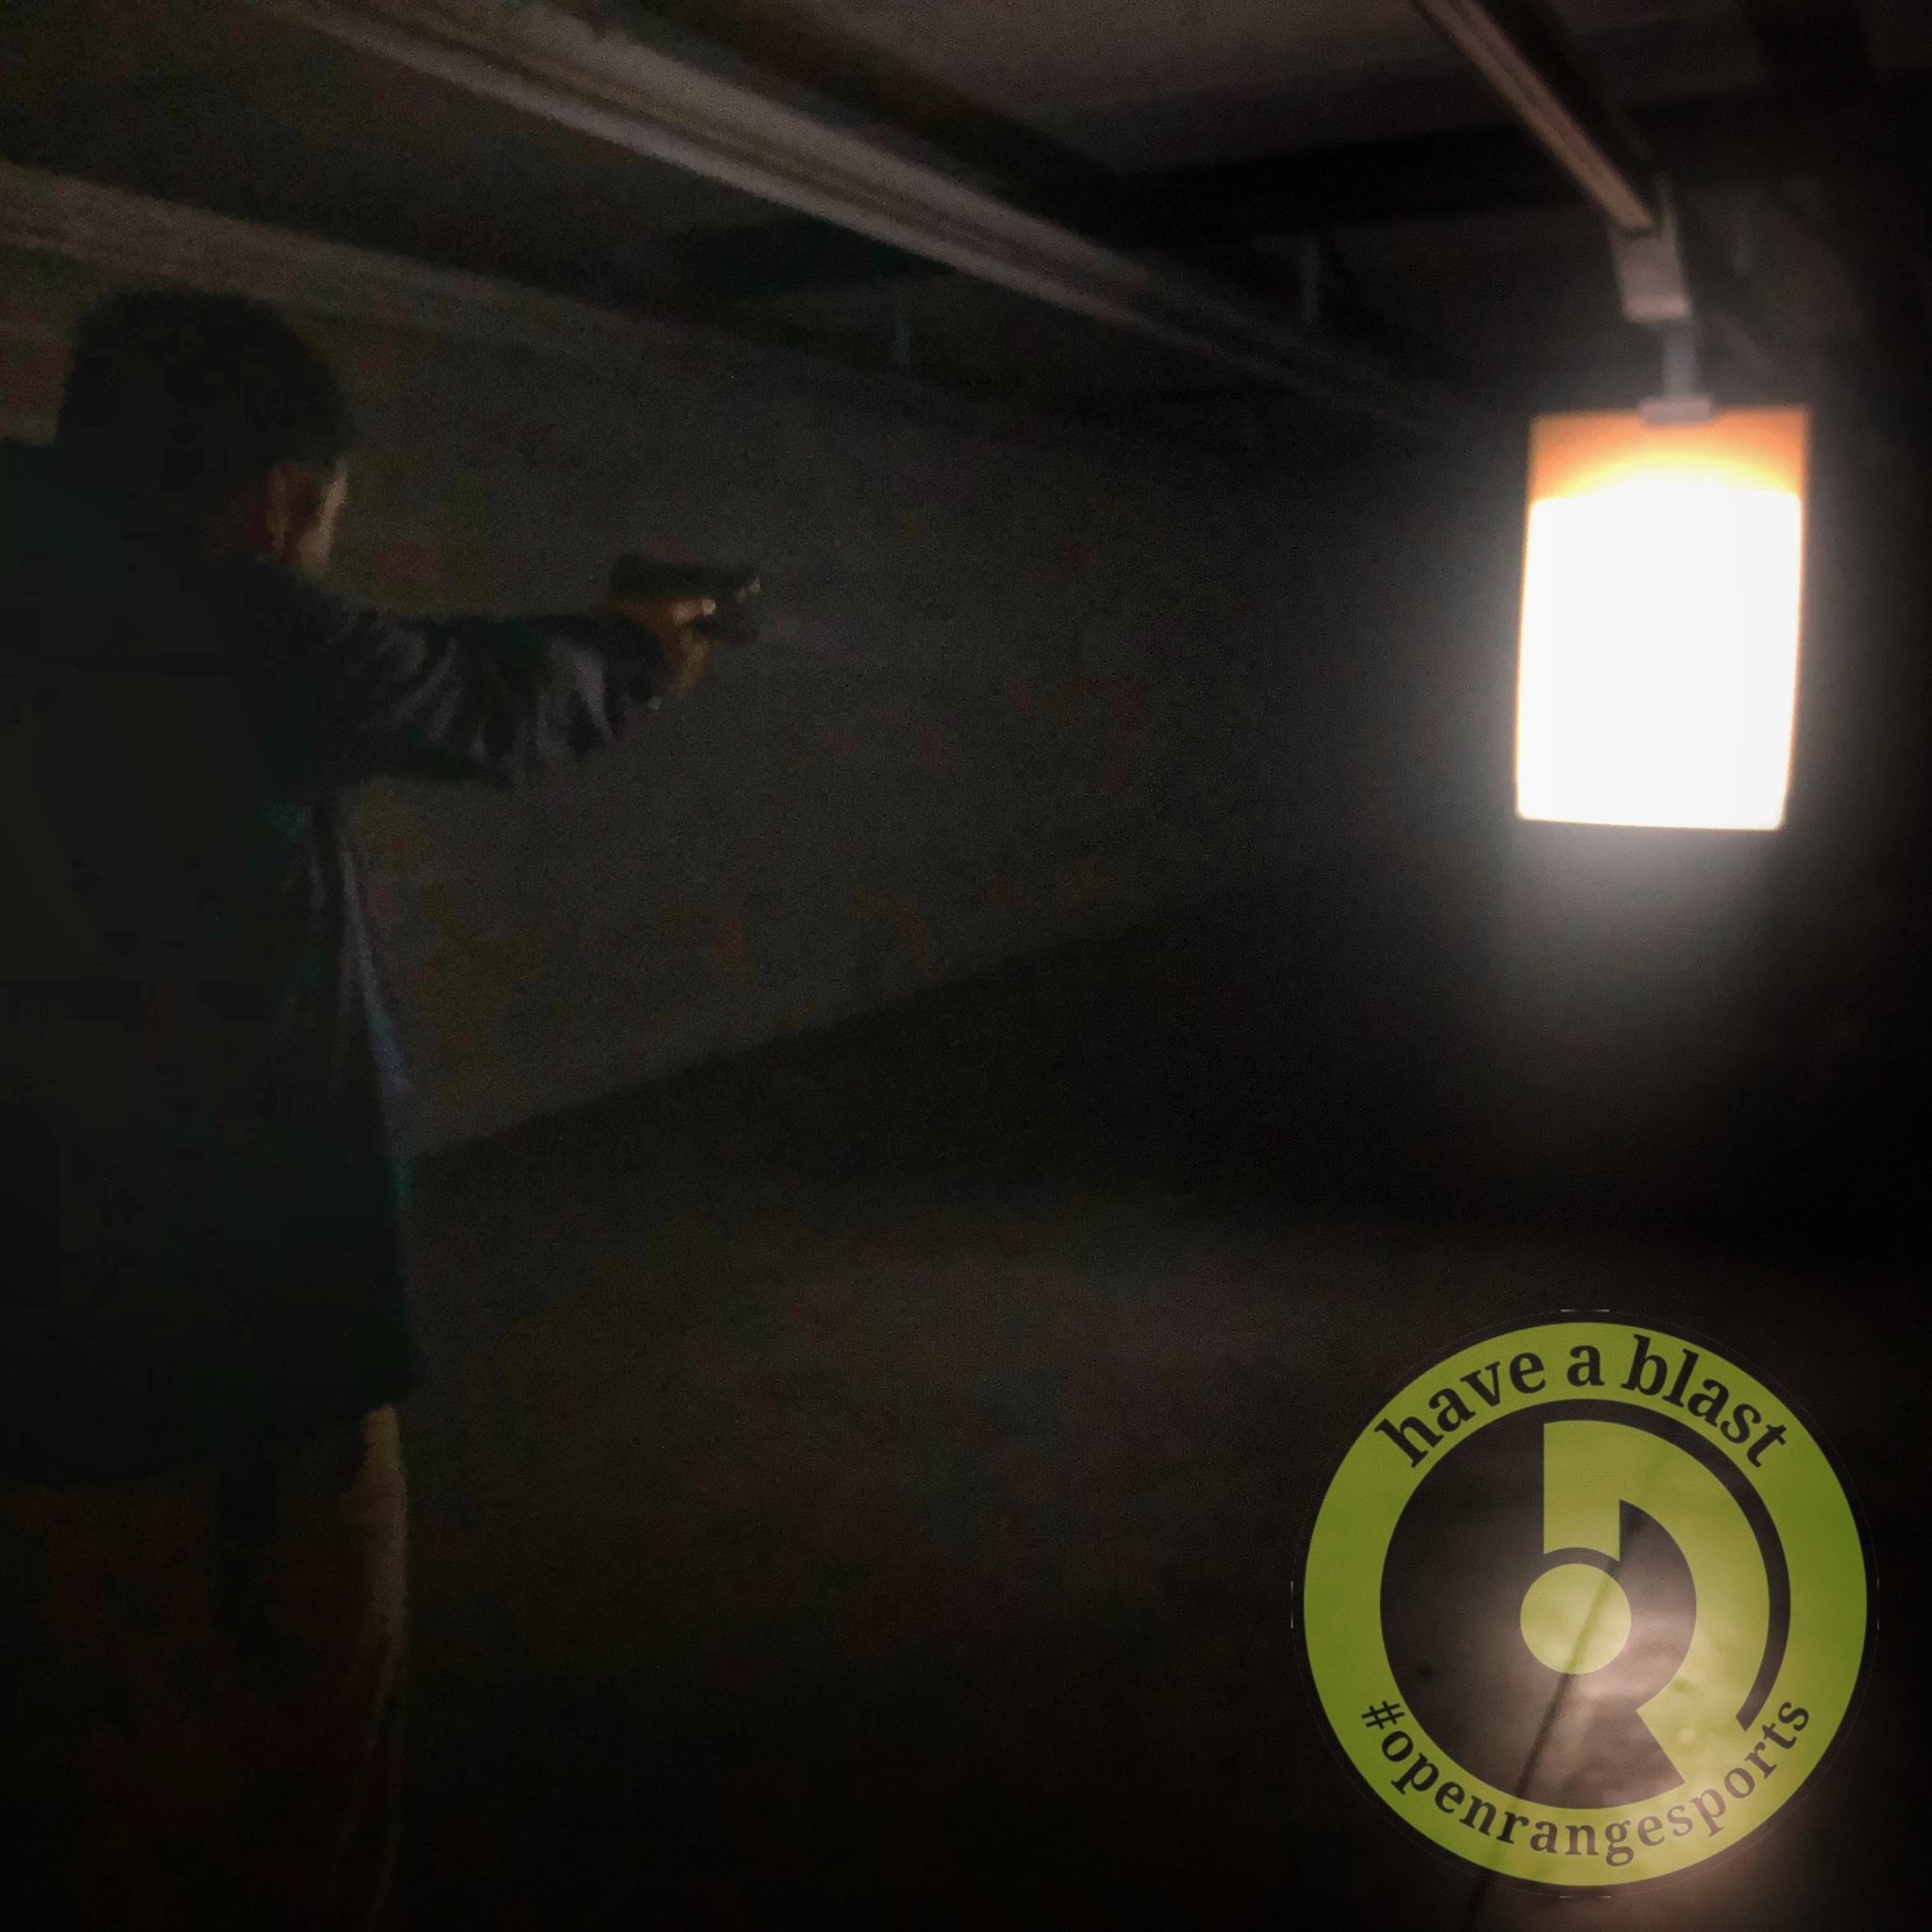 05/21 - Low Light Pistol Session - 9am to 12pm